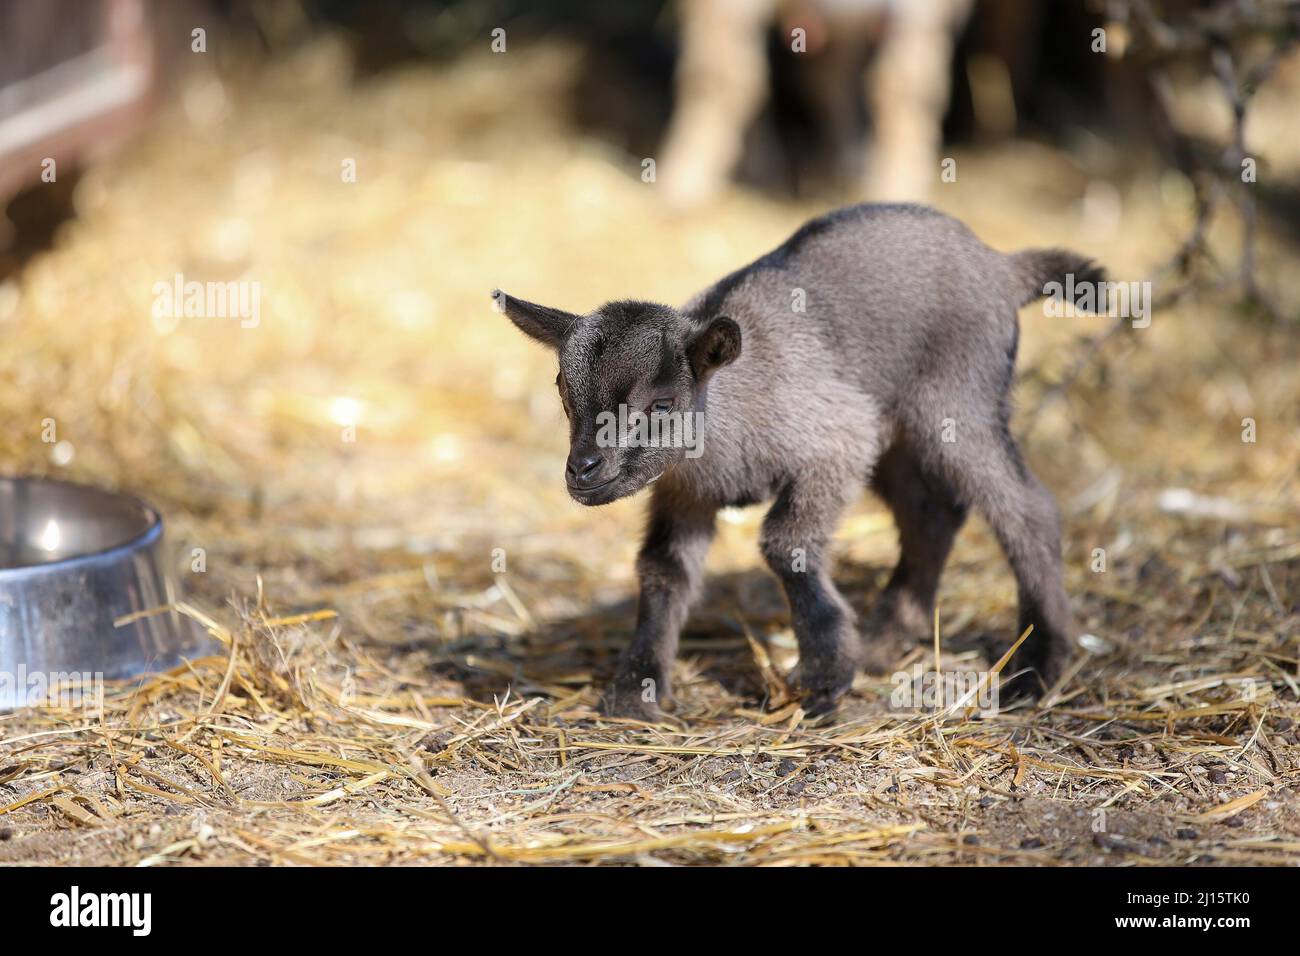 (220323) -- ZAGREB, March 23, 2022 (Xinhua) -- A baby dwarf goat is pictured in the Zagreb Zoo, in Zagreb, Croatia, on March 22, 2022. The baby dwarf goat, called Elena, was born four days ago in the zoo. (Matija Habljak/PIXSELL via Xinhua) Stock Photo